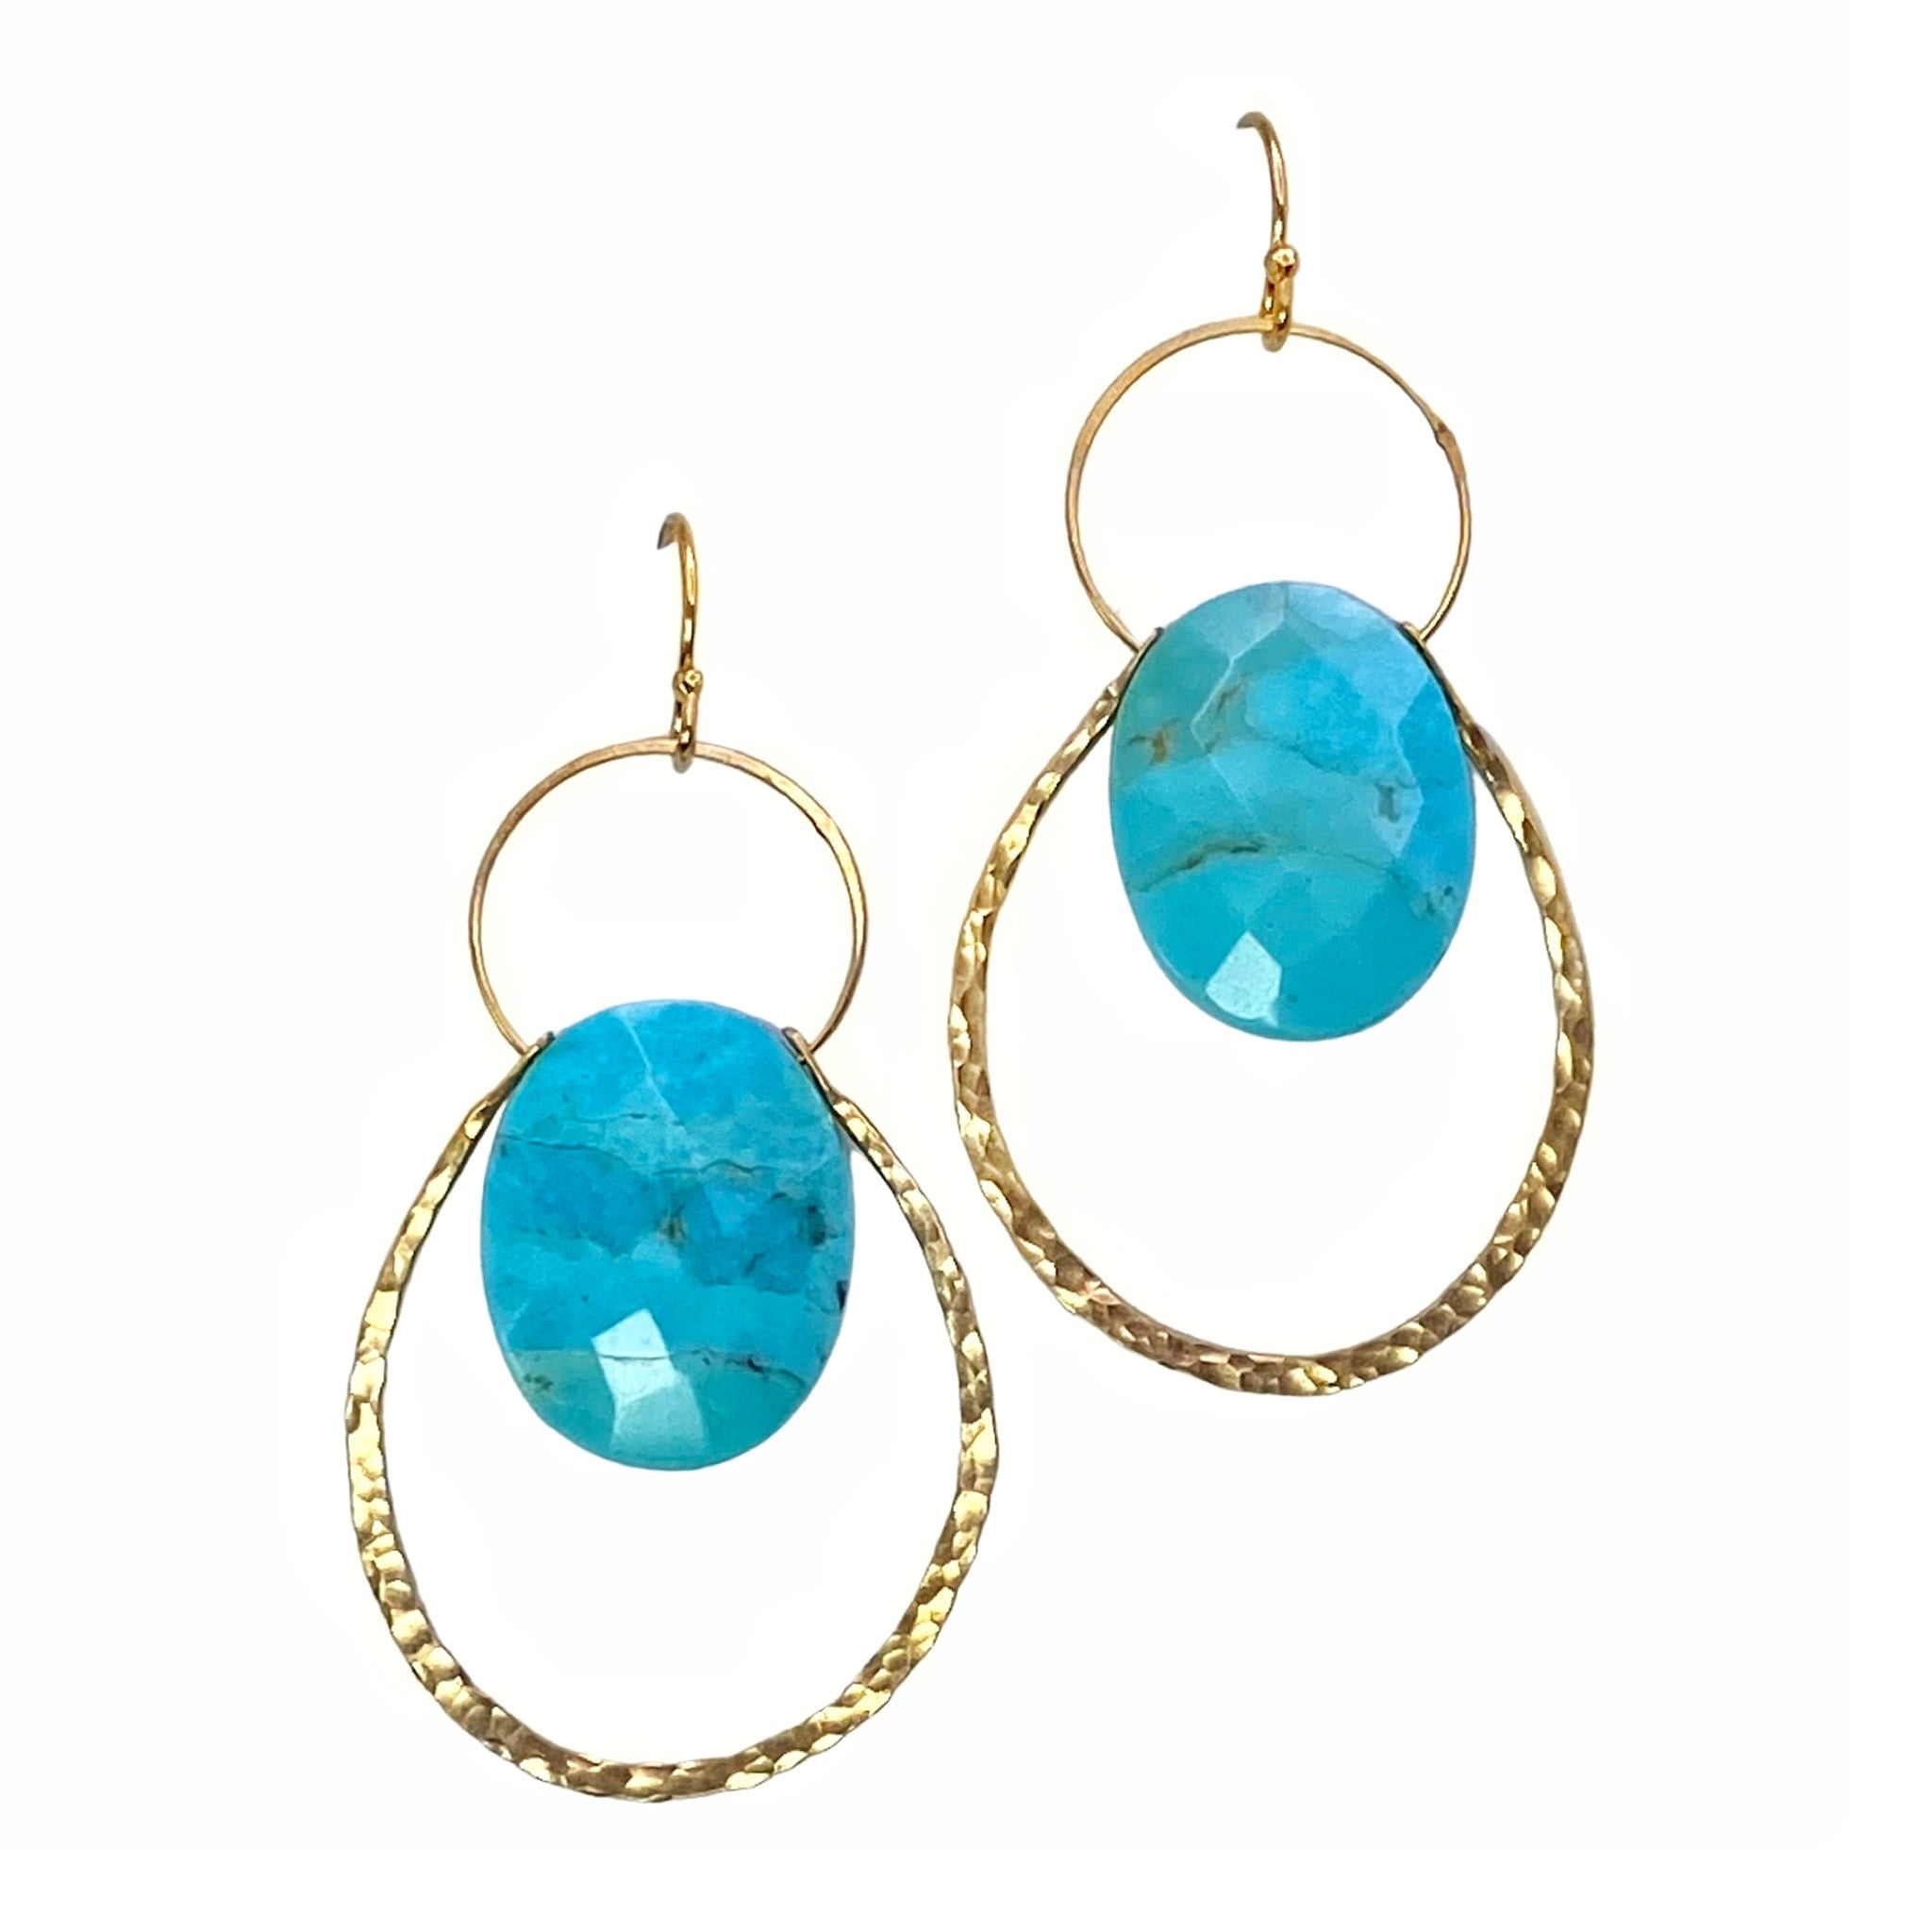 Lulu Designs Cali Earrings - Available at Shaylula Jewlery & Gifts in Tarrytown, NY and online.   A dramatic faceted turquoise oval gemstone floats in the center of two intersecting hammered gold hoops making them a refreshing statement earring that goes with everything! Made with love in Mill Valley, CA. (Model is wearing labradorite version.)  • Turquoise, 14k gold filled  • 1.75" L;  .71" L x  .51" W turquoise  • 14k gold fill earwire